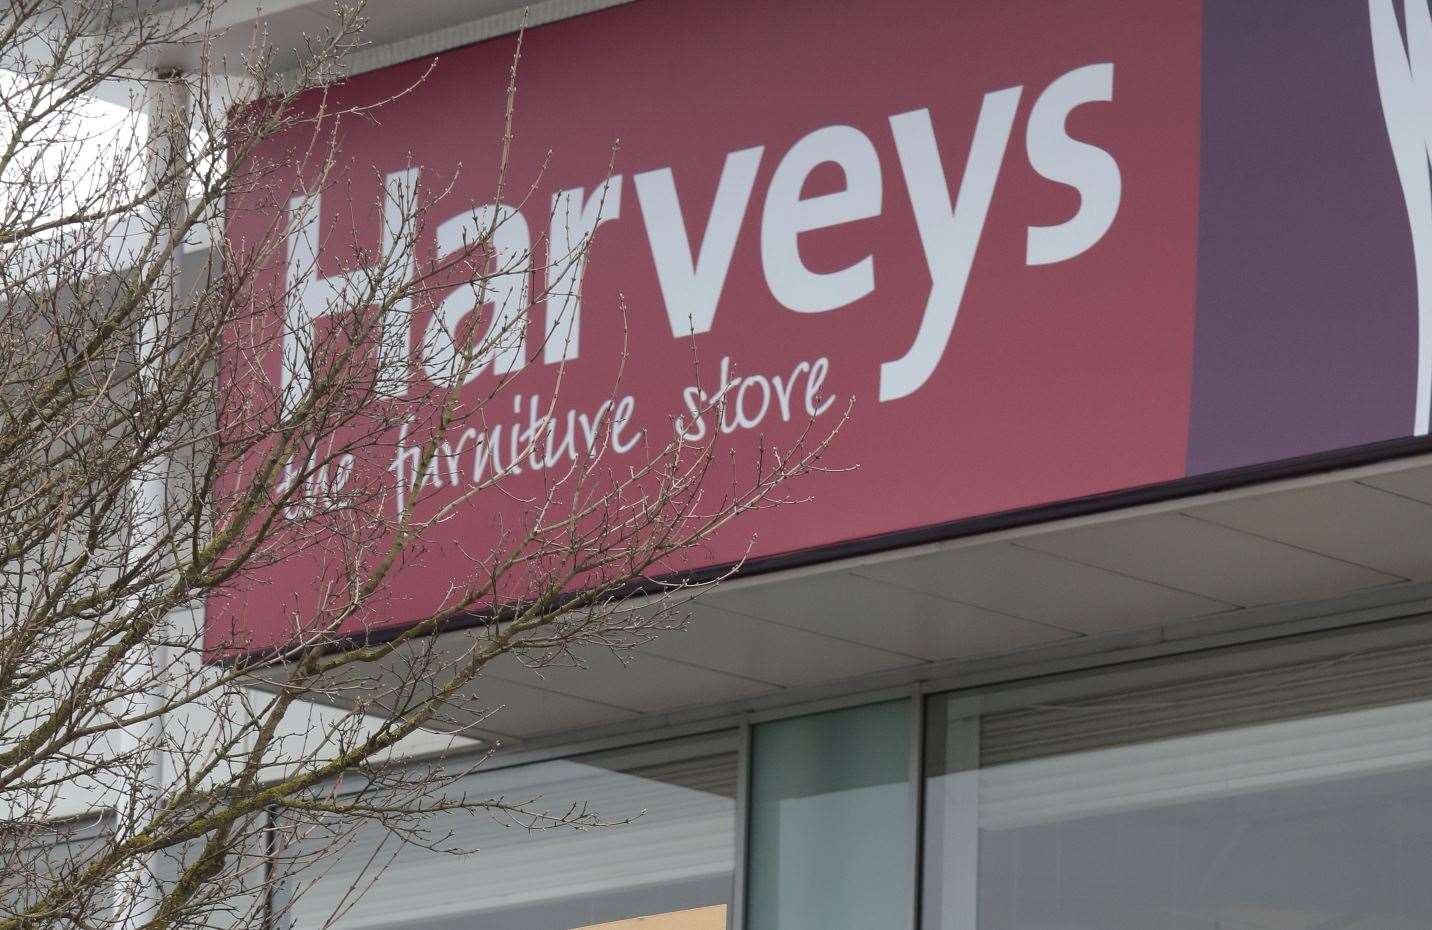 Harveys is the latest big name to fall as a result of the pandemic